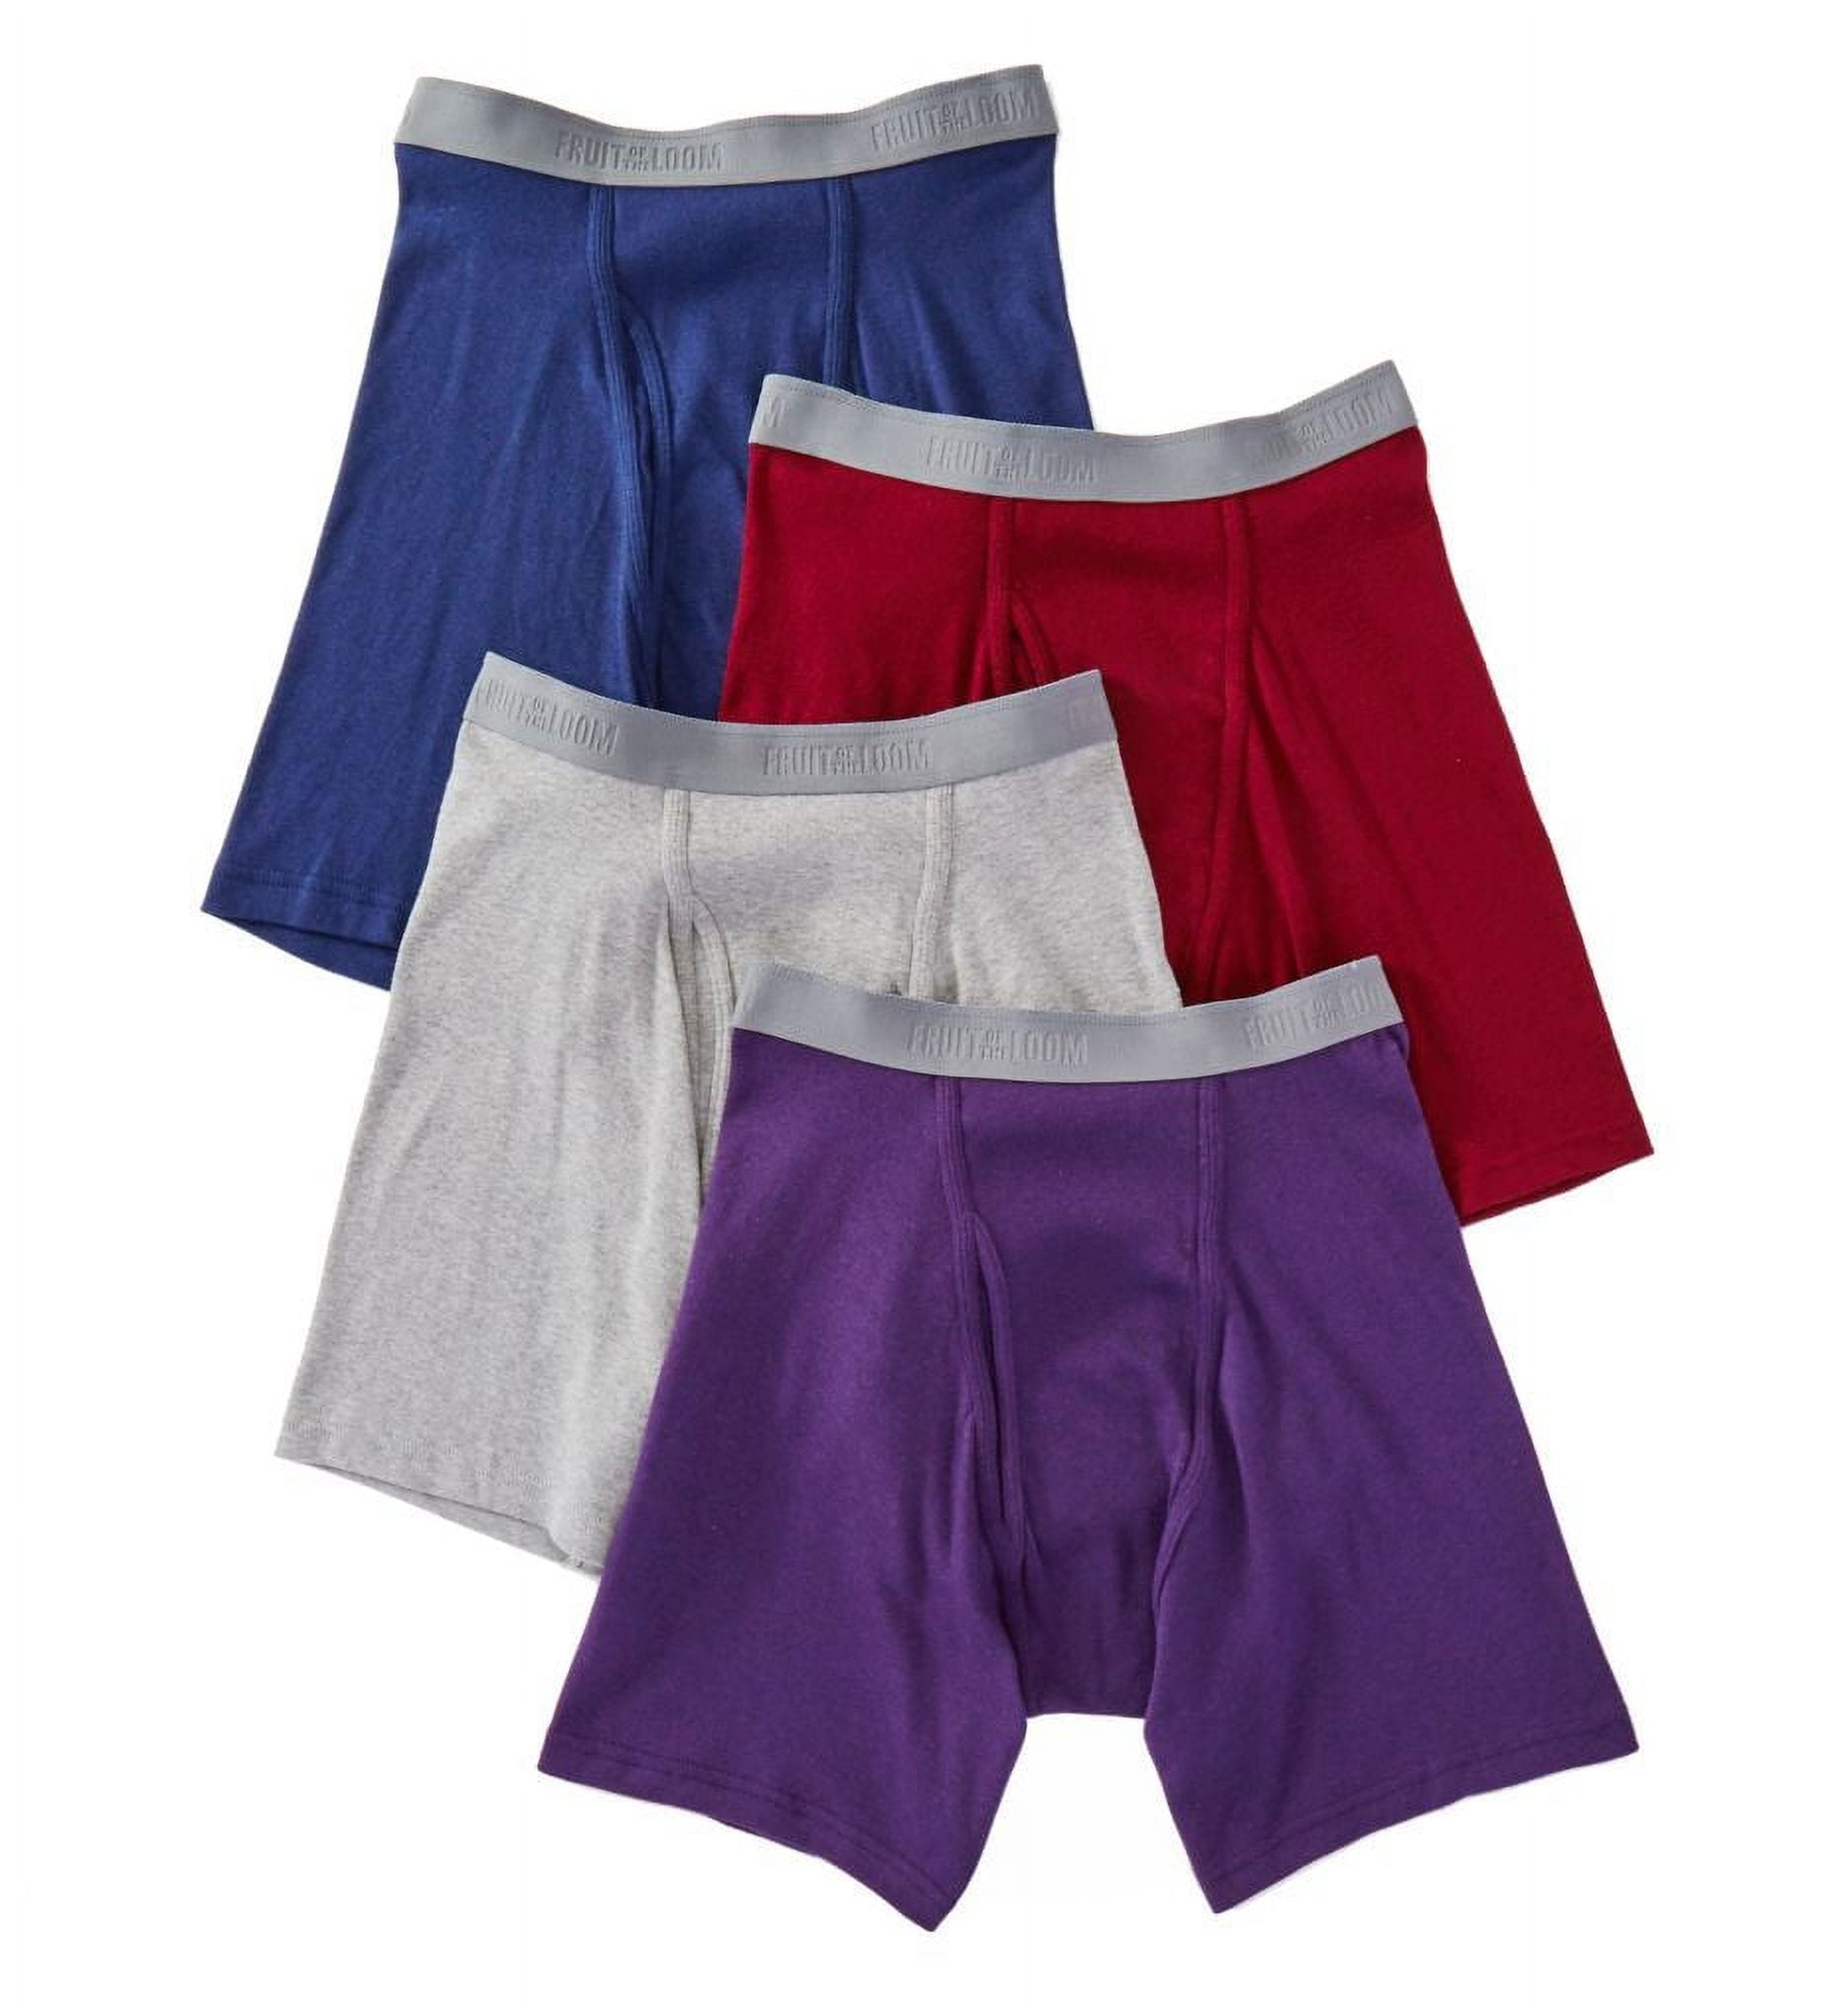 Fruit of the Loom Women's 360 Stretch Boxer Brief Underwear, 4 Pack, Sizes  S-2XL